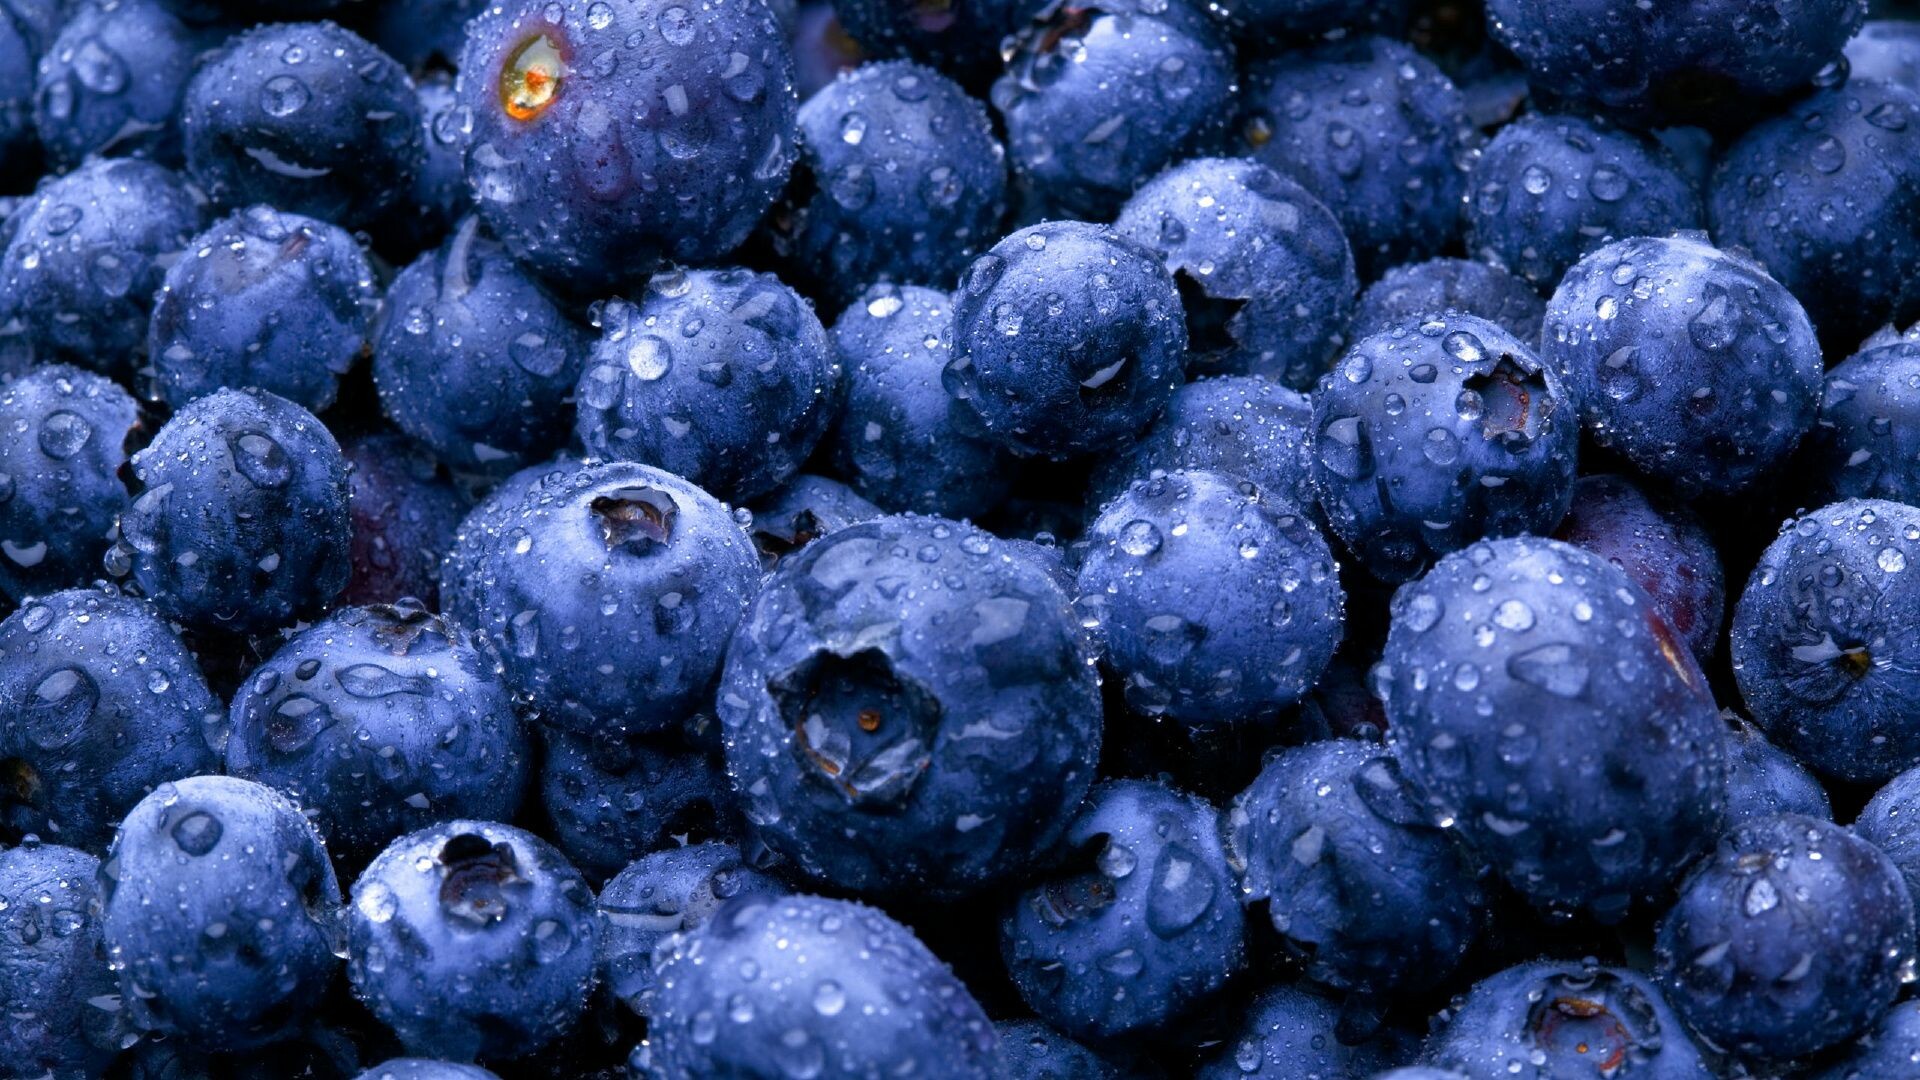 Blue Food Wallpaper: HD, 4K, 5K for PC and Mobile. Download free image for iPhone, Android